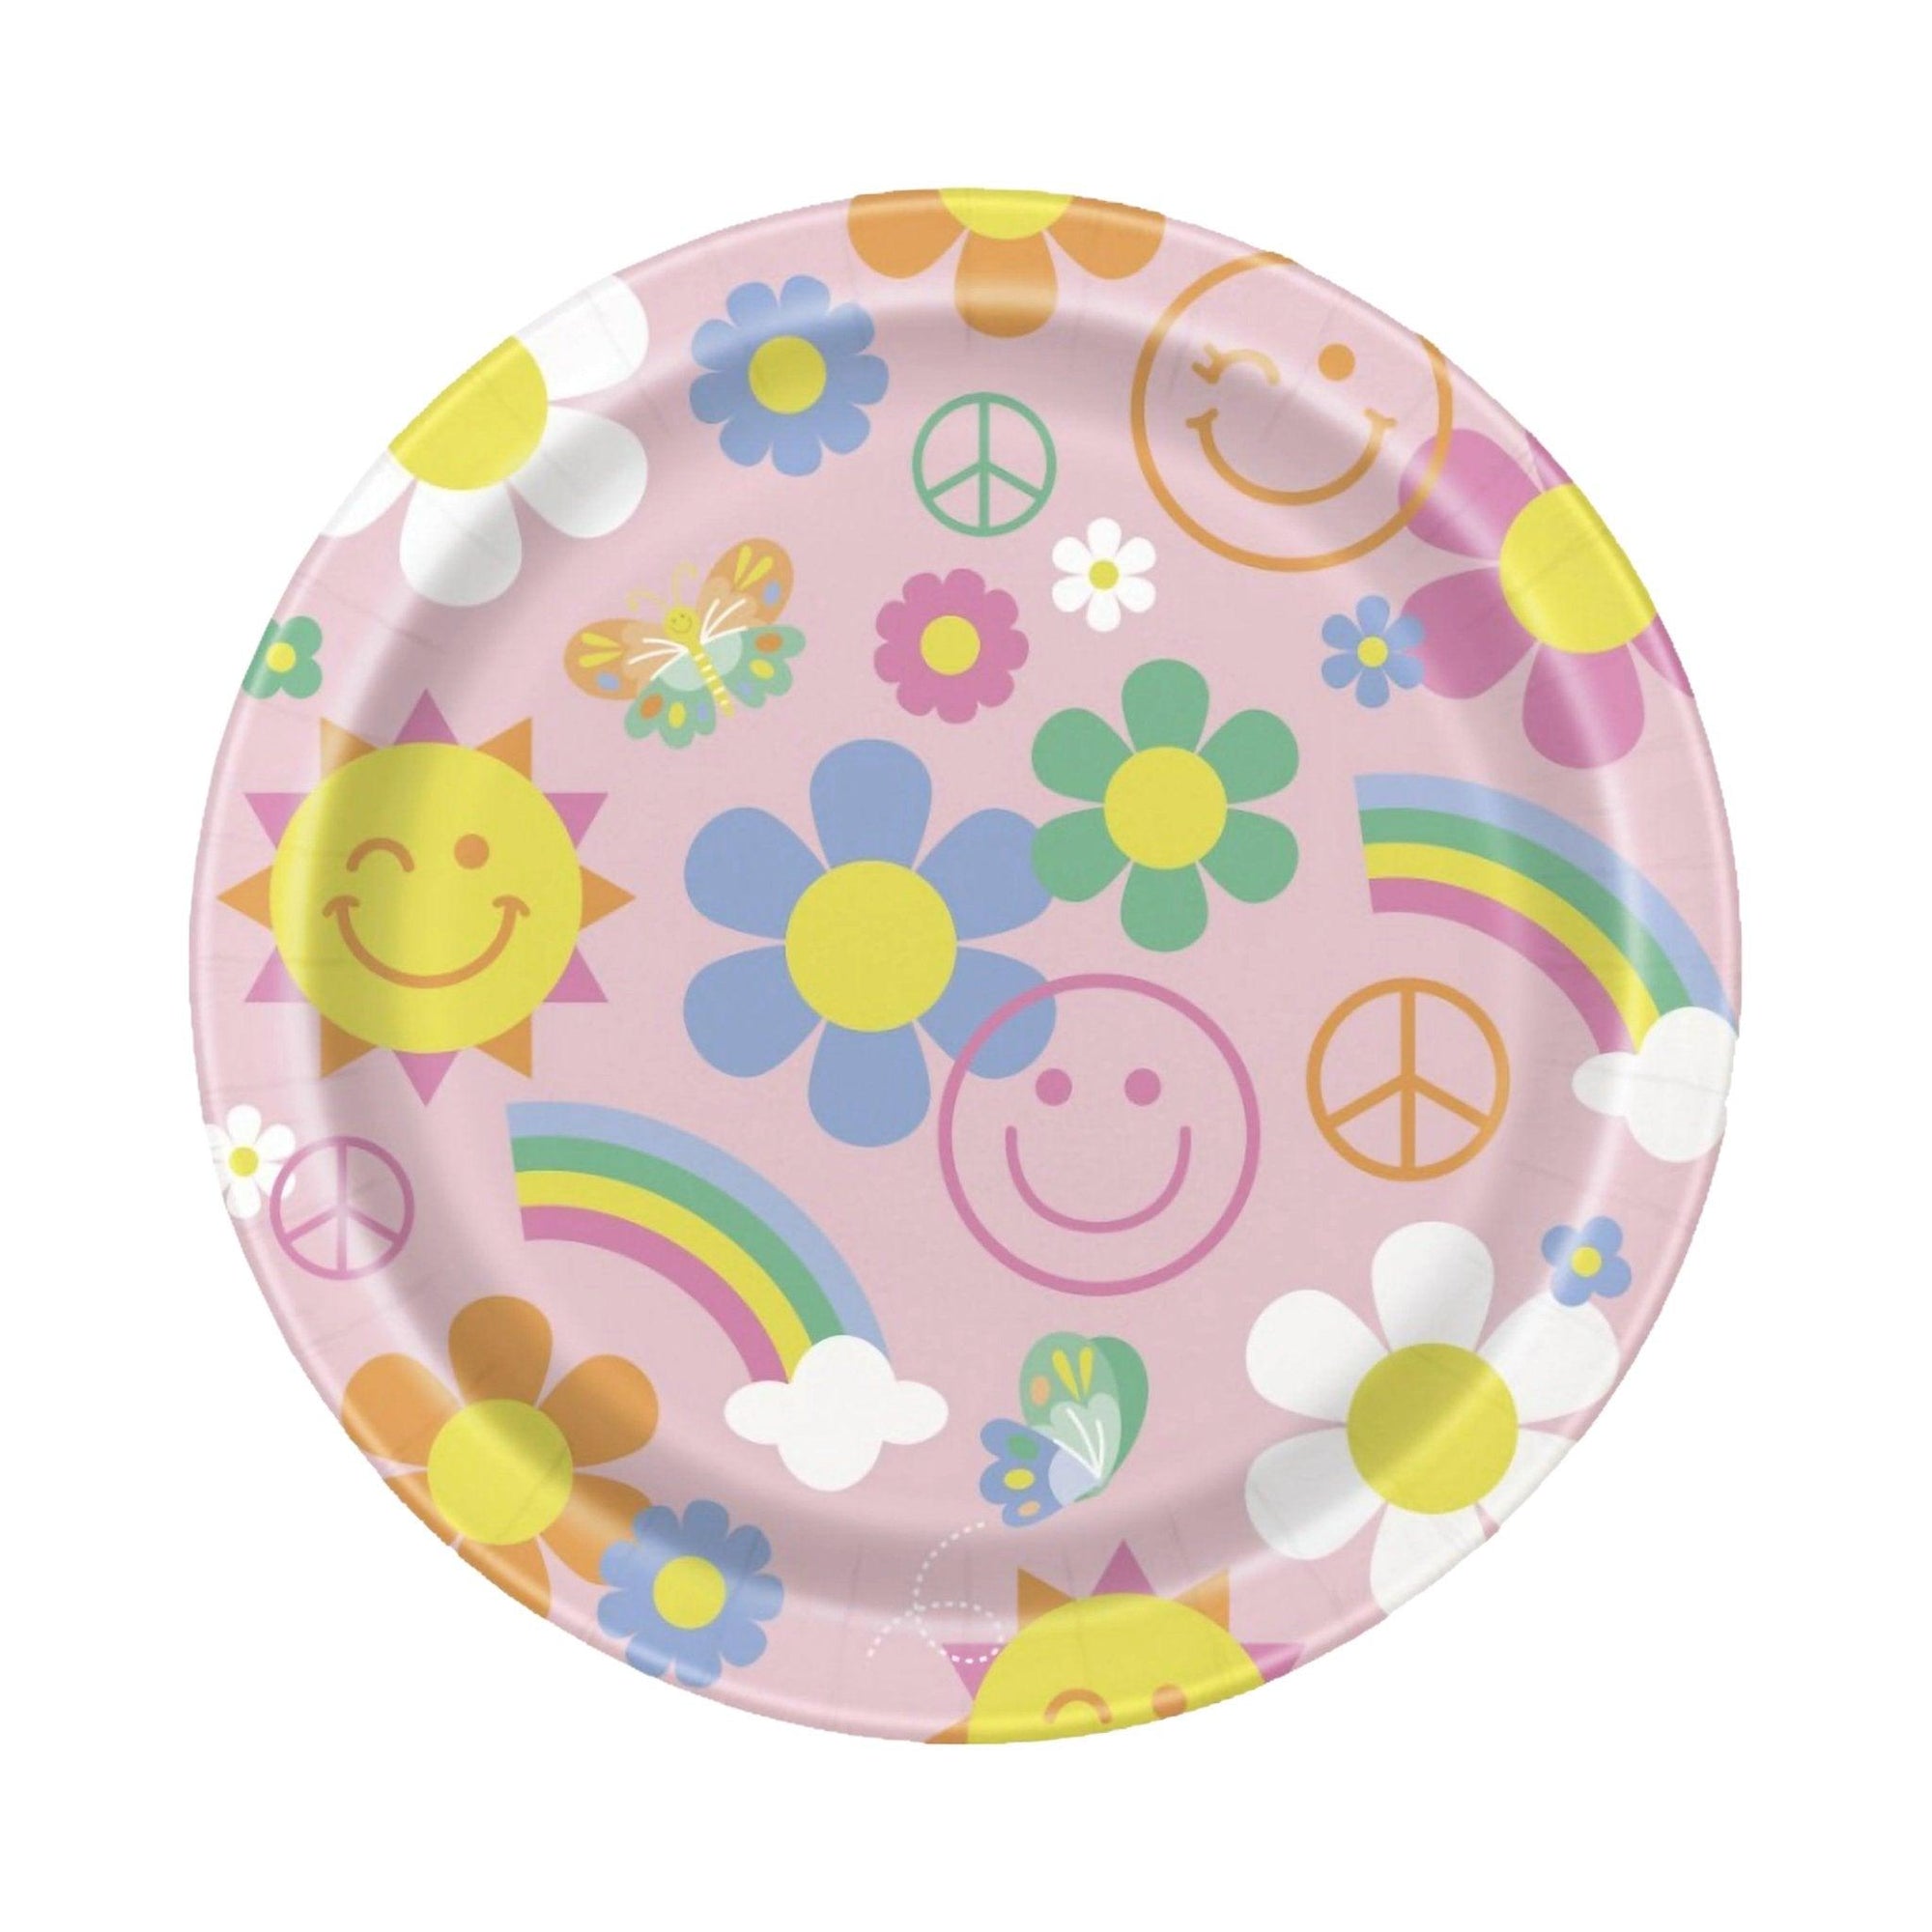 Groovy Birthday Party Dinner Plates, Pack of 8 | Amazing Pinatas